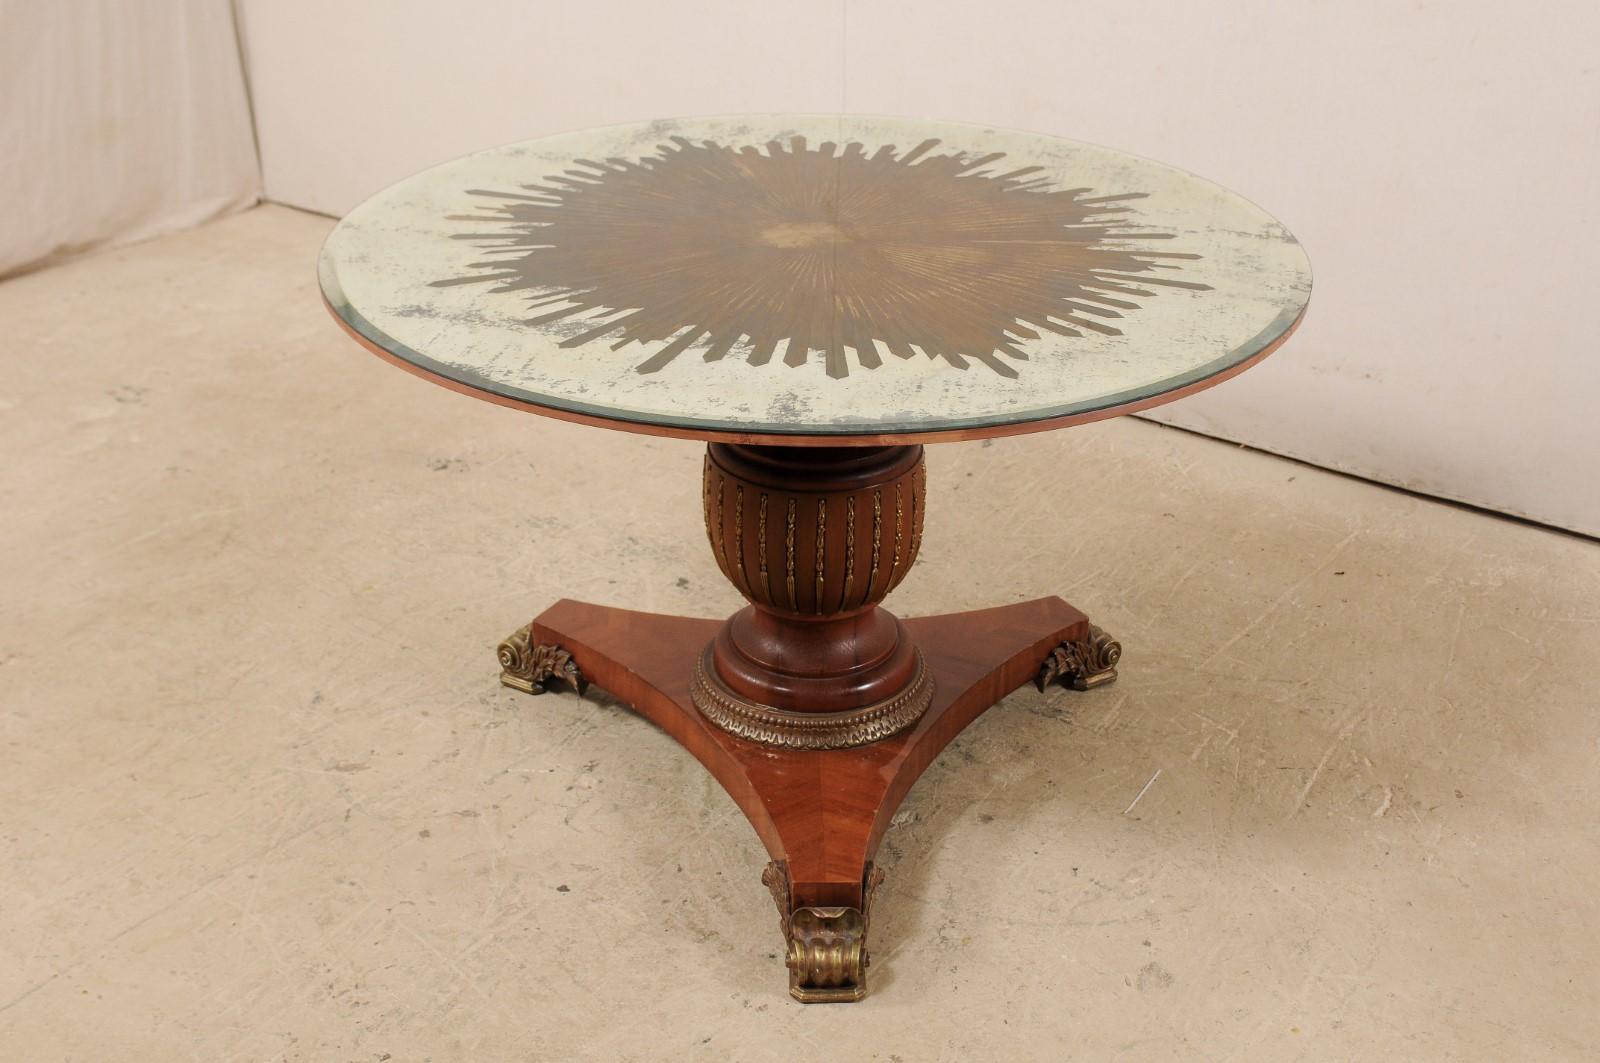 This fabulous custom center table has been fashioned with an artisan-made, round-shaped mirror top, with verre églomisé sunburst center, top which rests upon a vintage carved-wood pedestal base. The gold verre églomisé star or sunburst fills up the